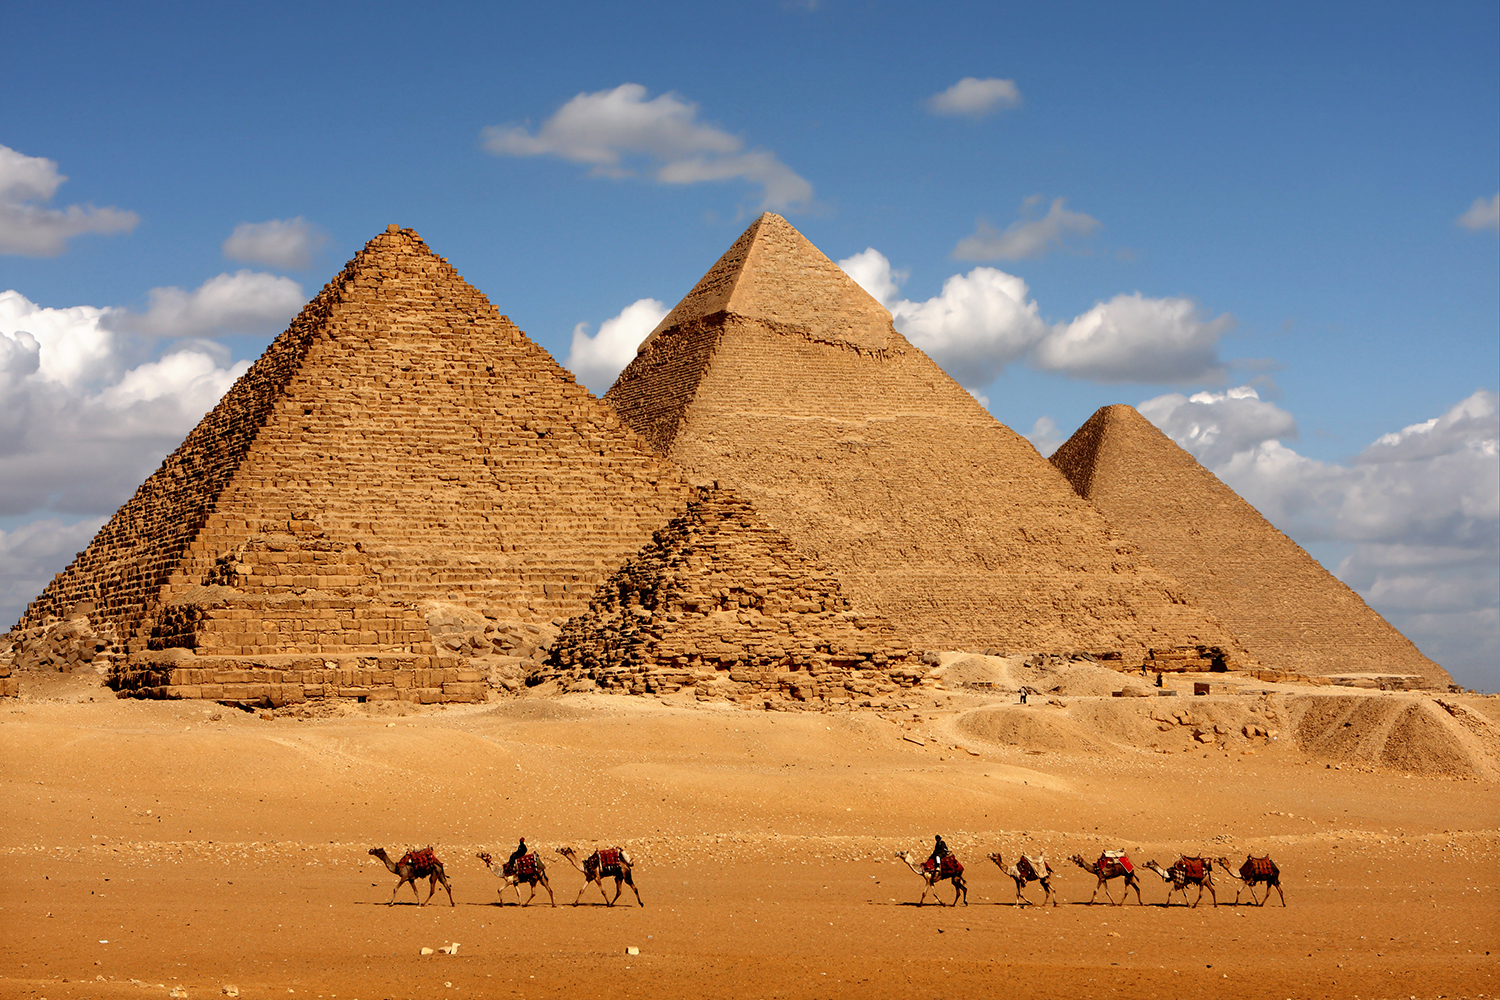 An image of Giza Pyramids in Egypt.